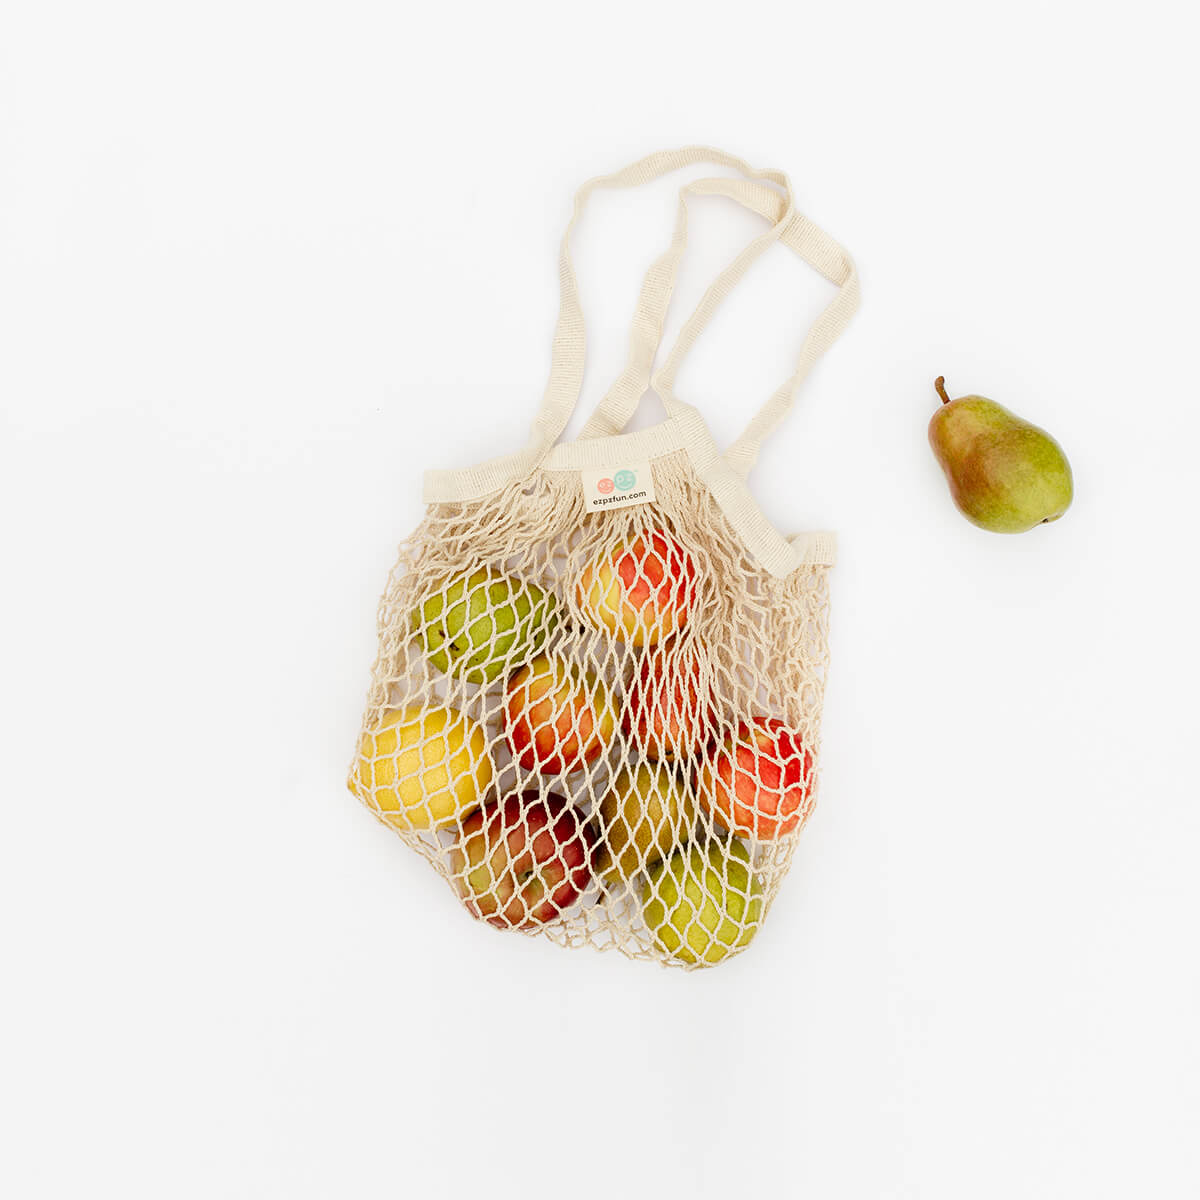 Vegetable Cloth Bags Online - www.edoc.com.vn 1693507892